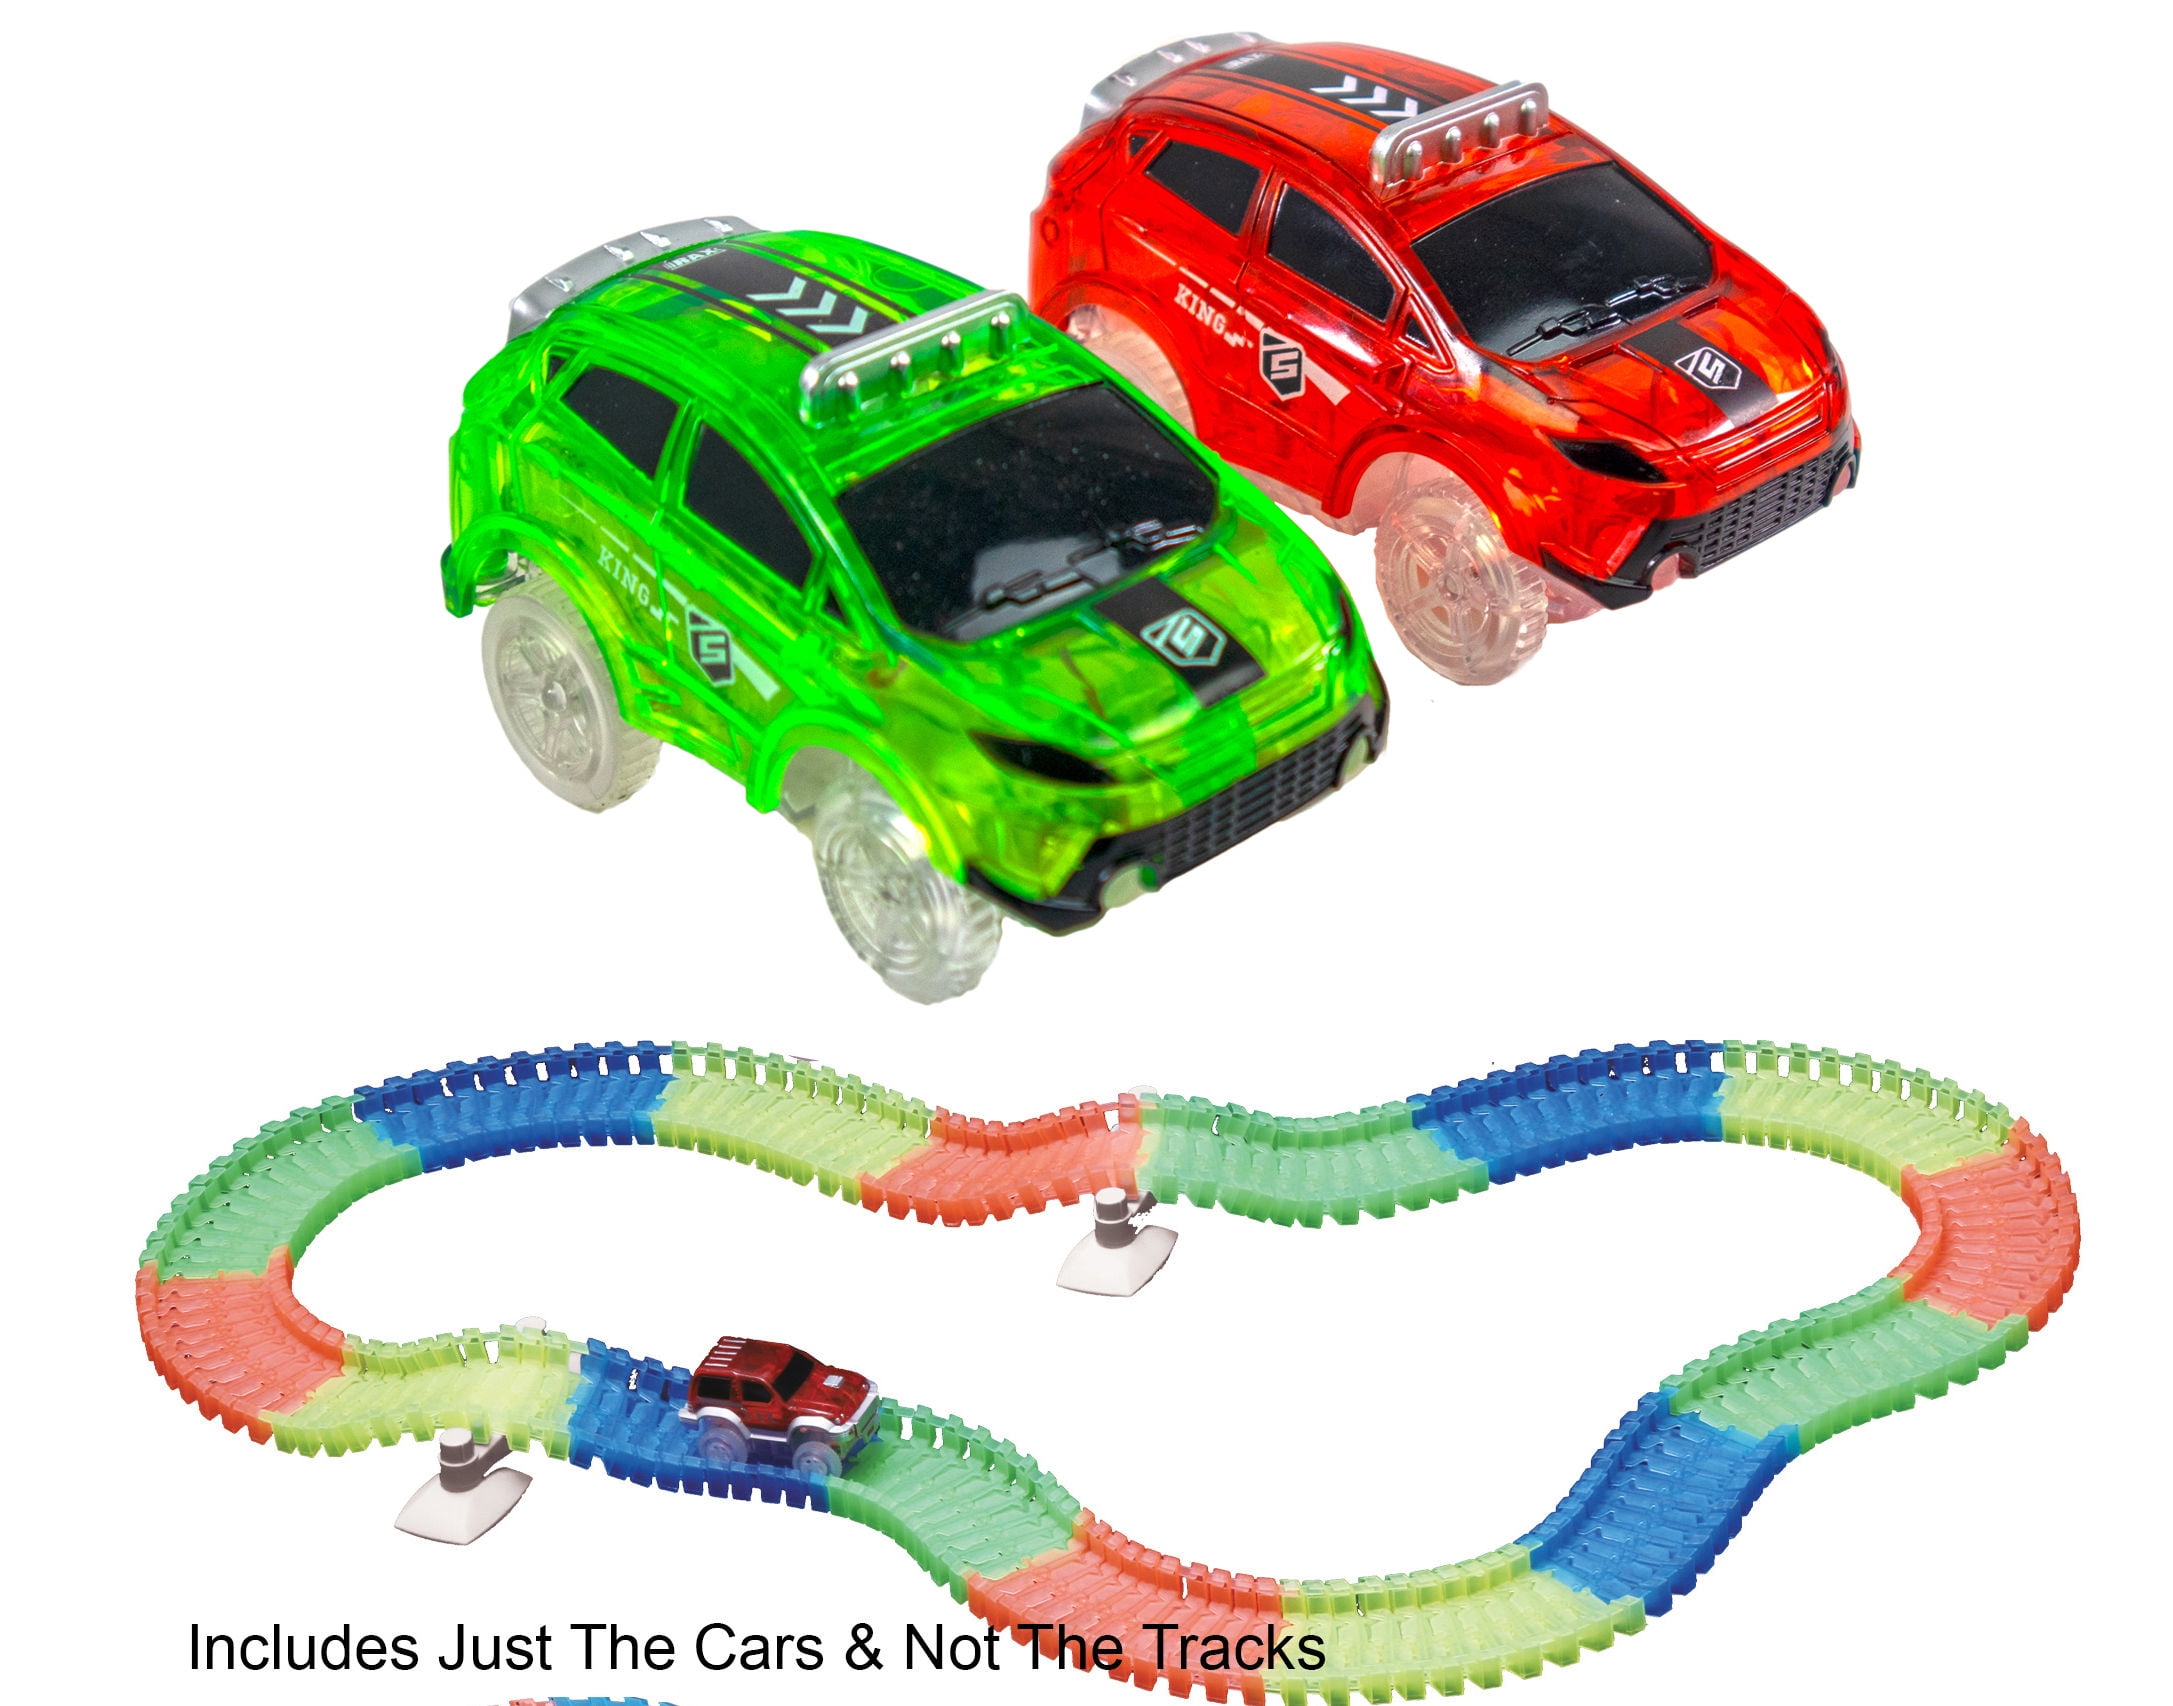  Tracks Cars Replacement only, Toy Cars for Magic Tracks Glow in  The Dark, Racing Car Track Accessories with 5 Flashing LED Lights,  Compatible with Most Car Tracks for Kids Boys and